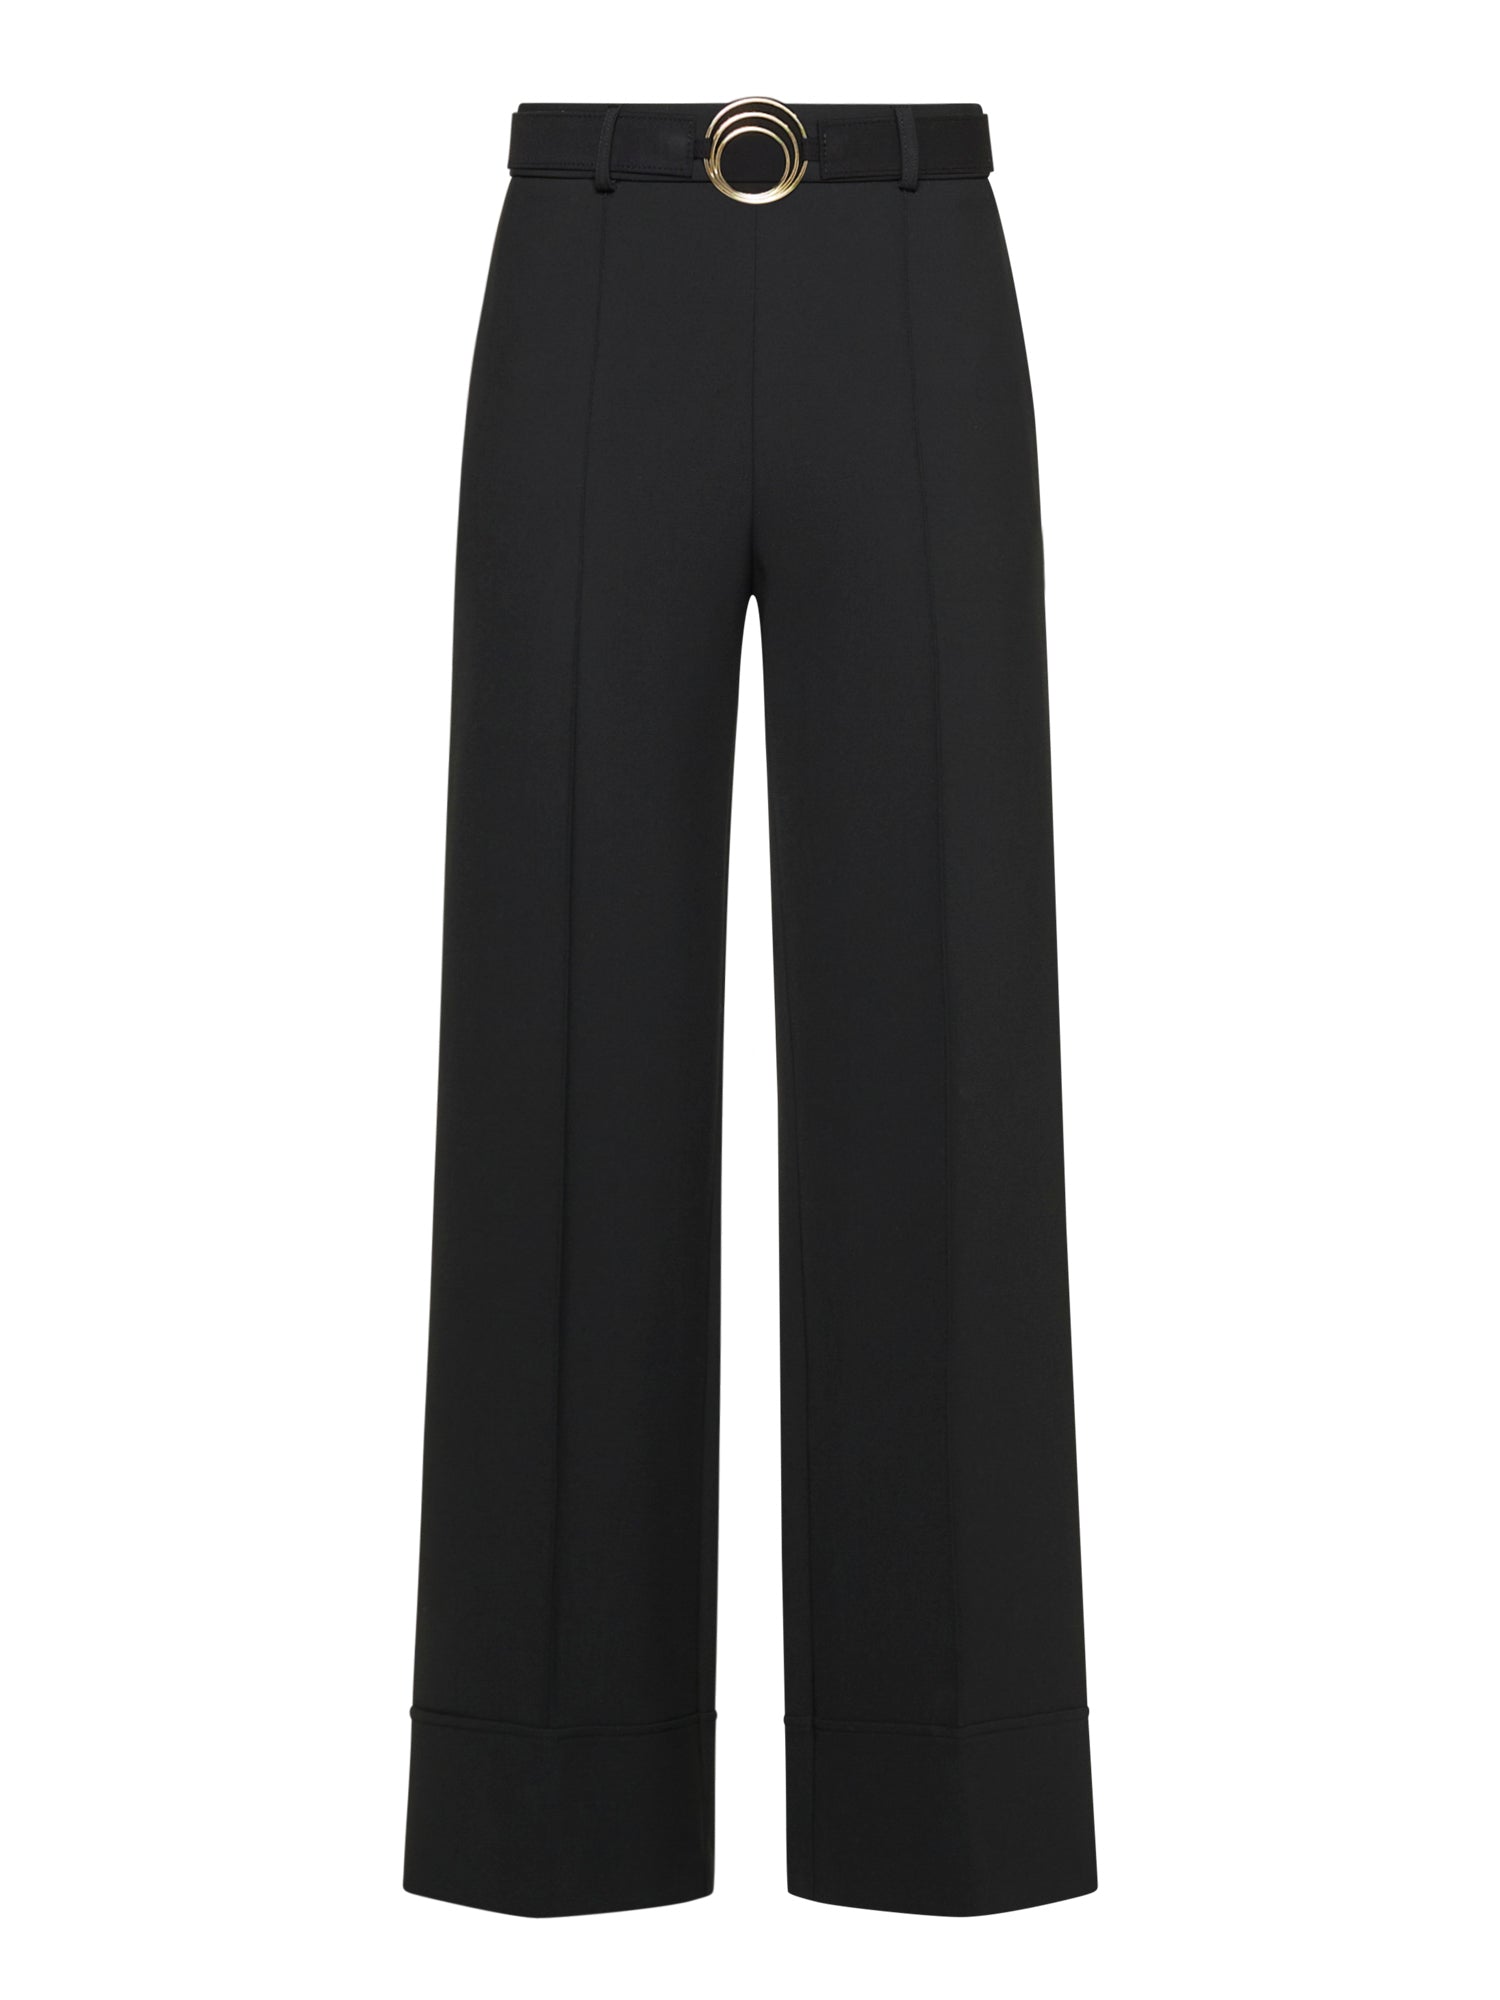 Wide trousers with belt and triple ring buckle